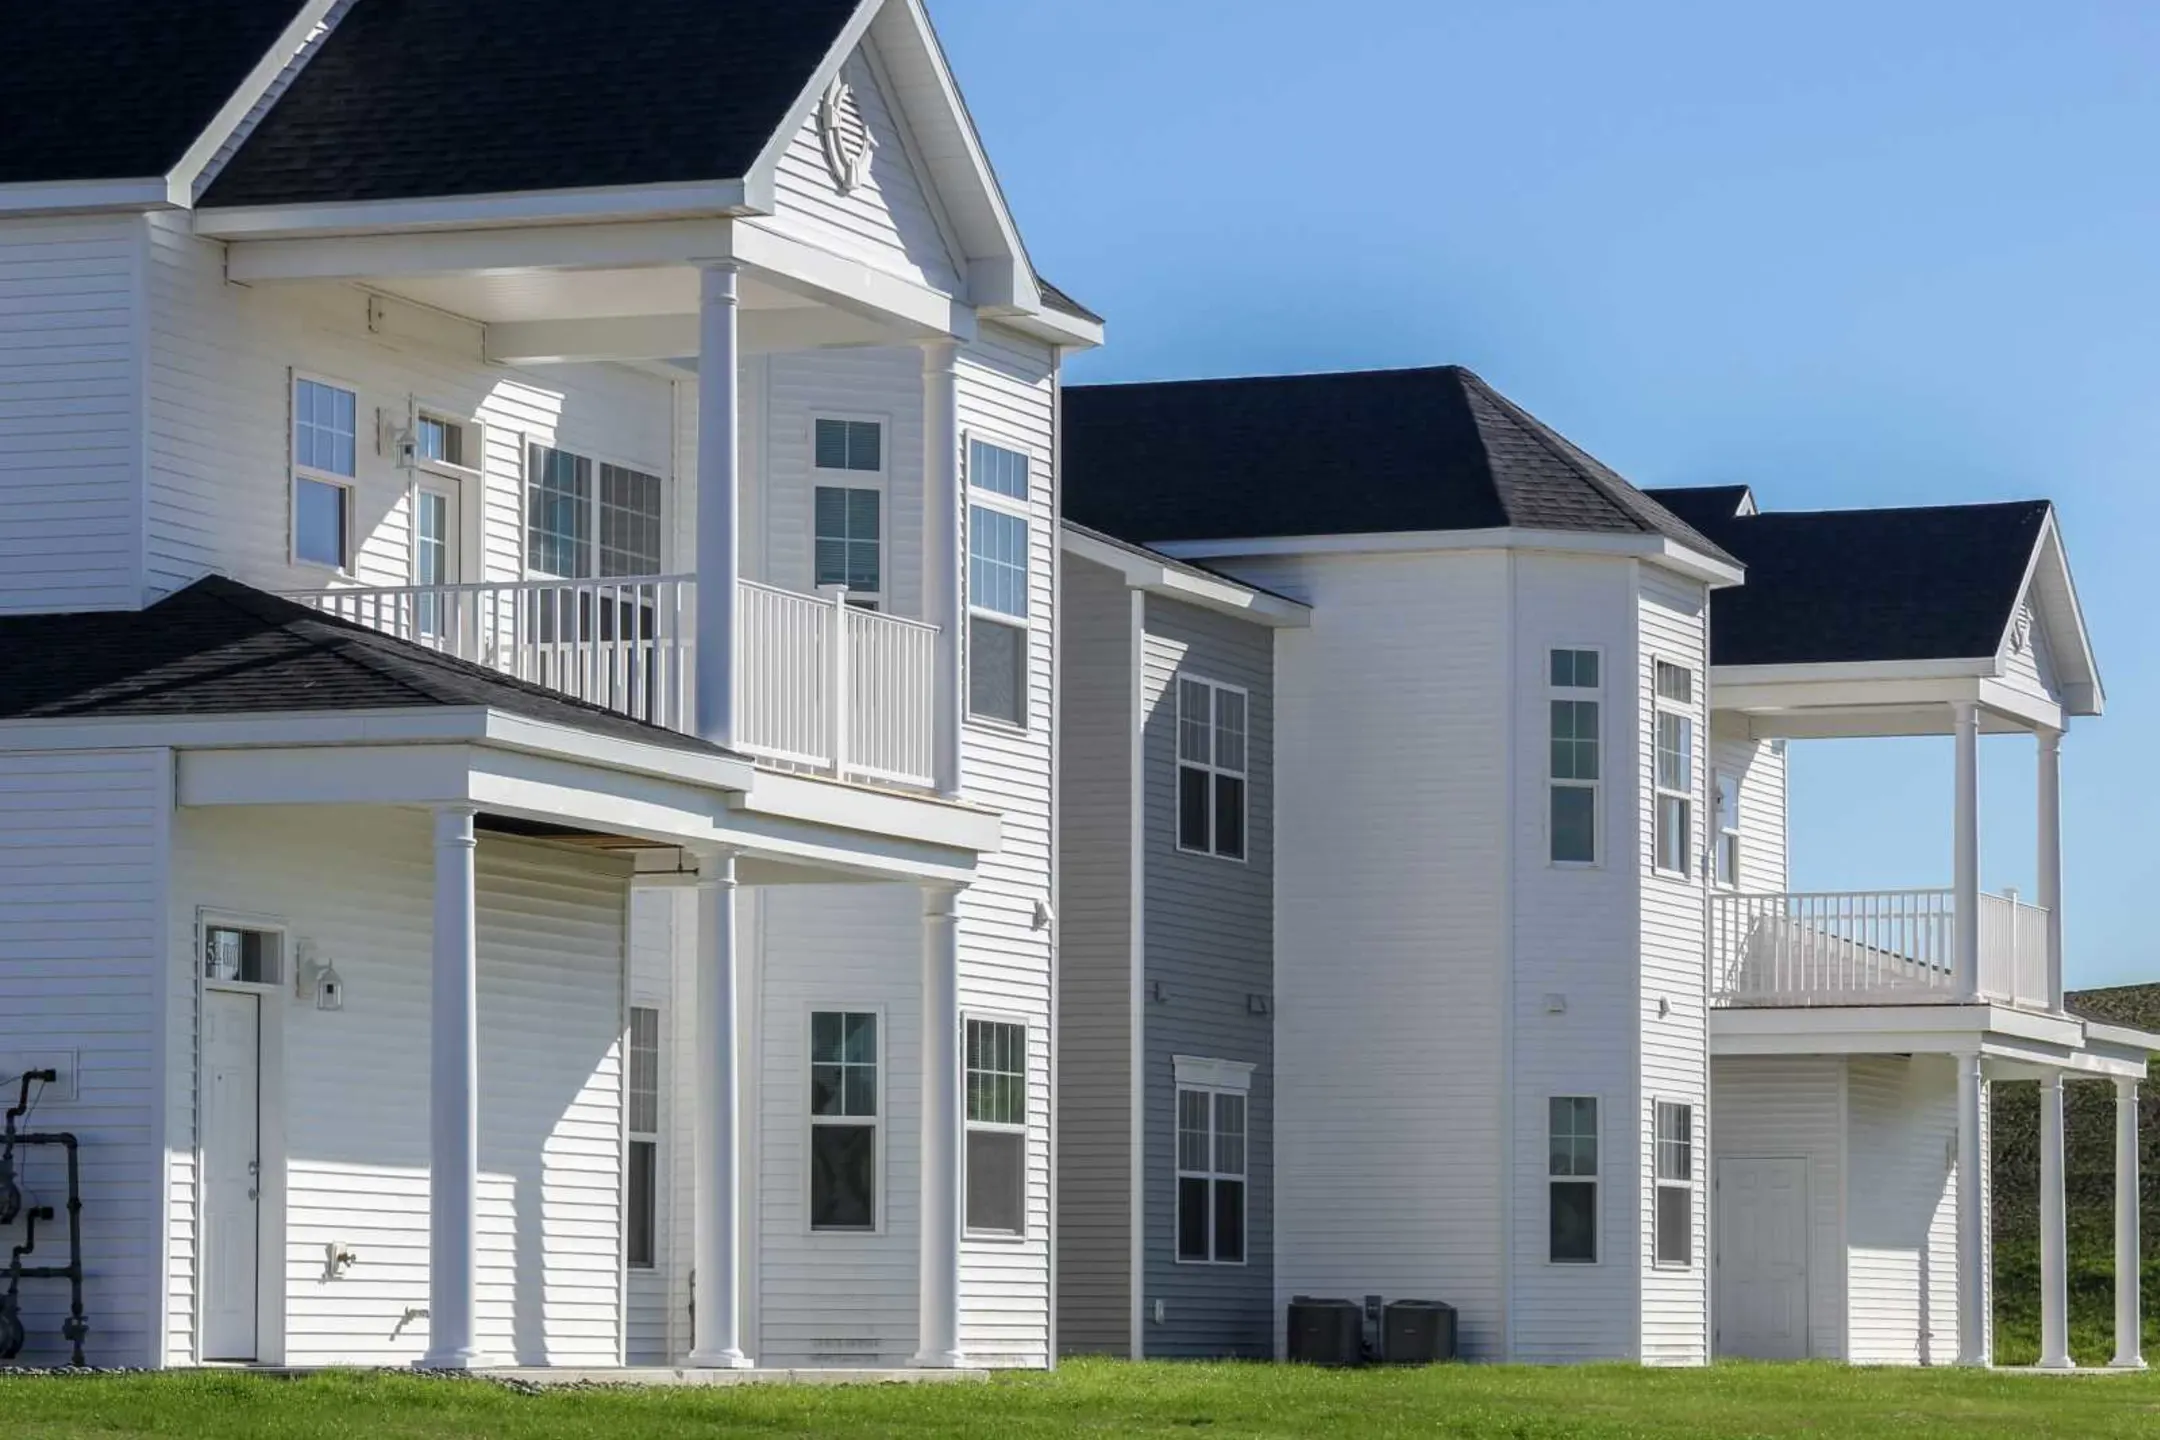 Building - The Residences at Lexington Hills - Cohoes, NY